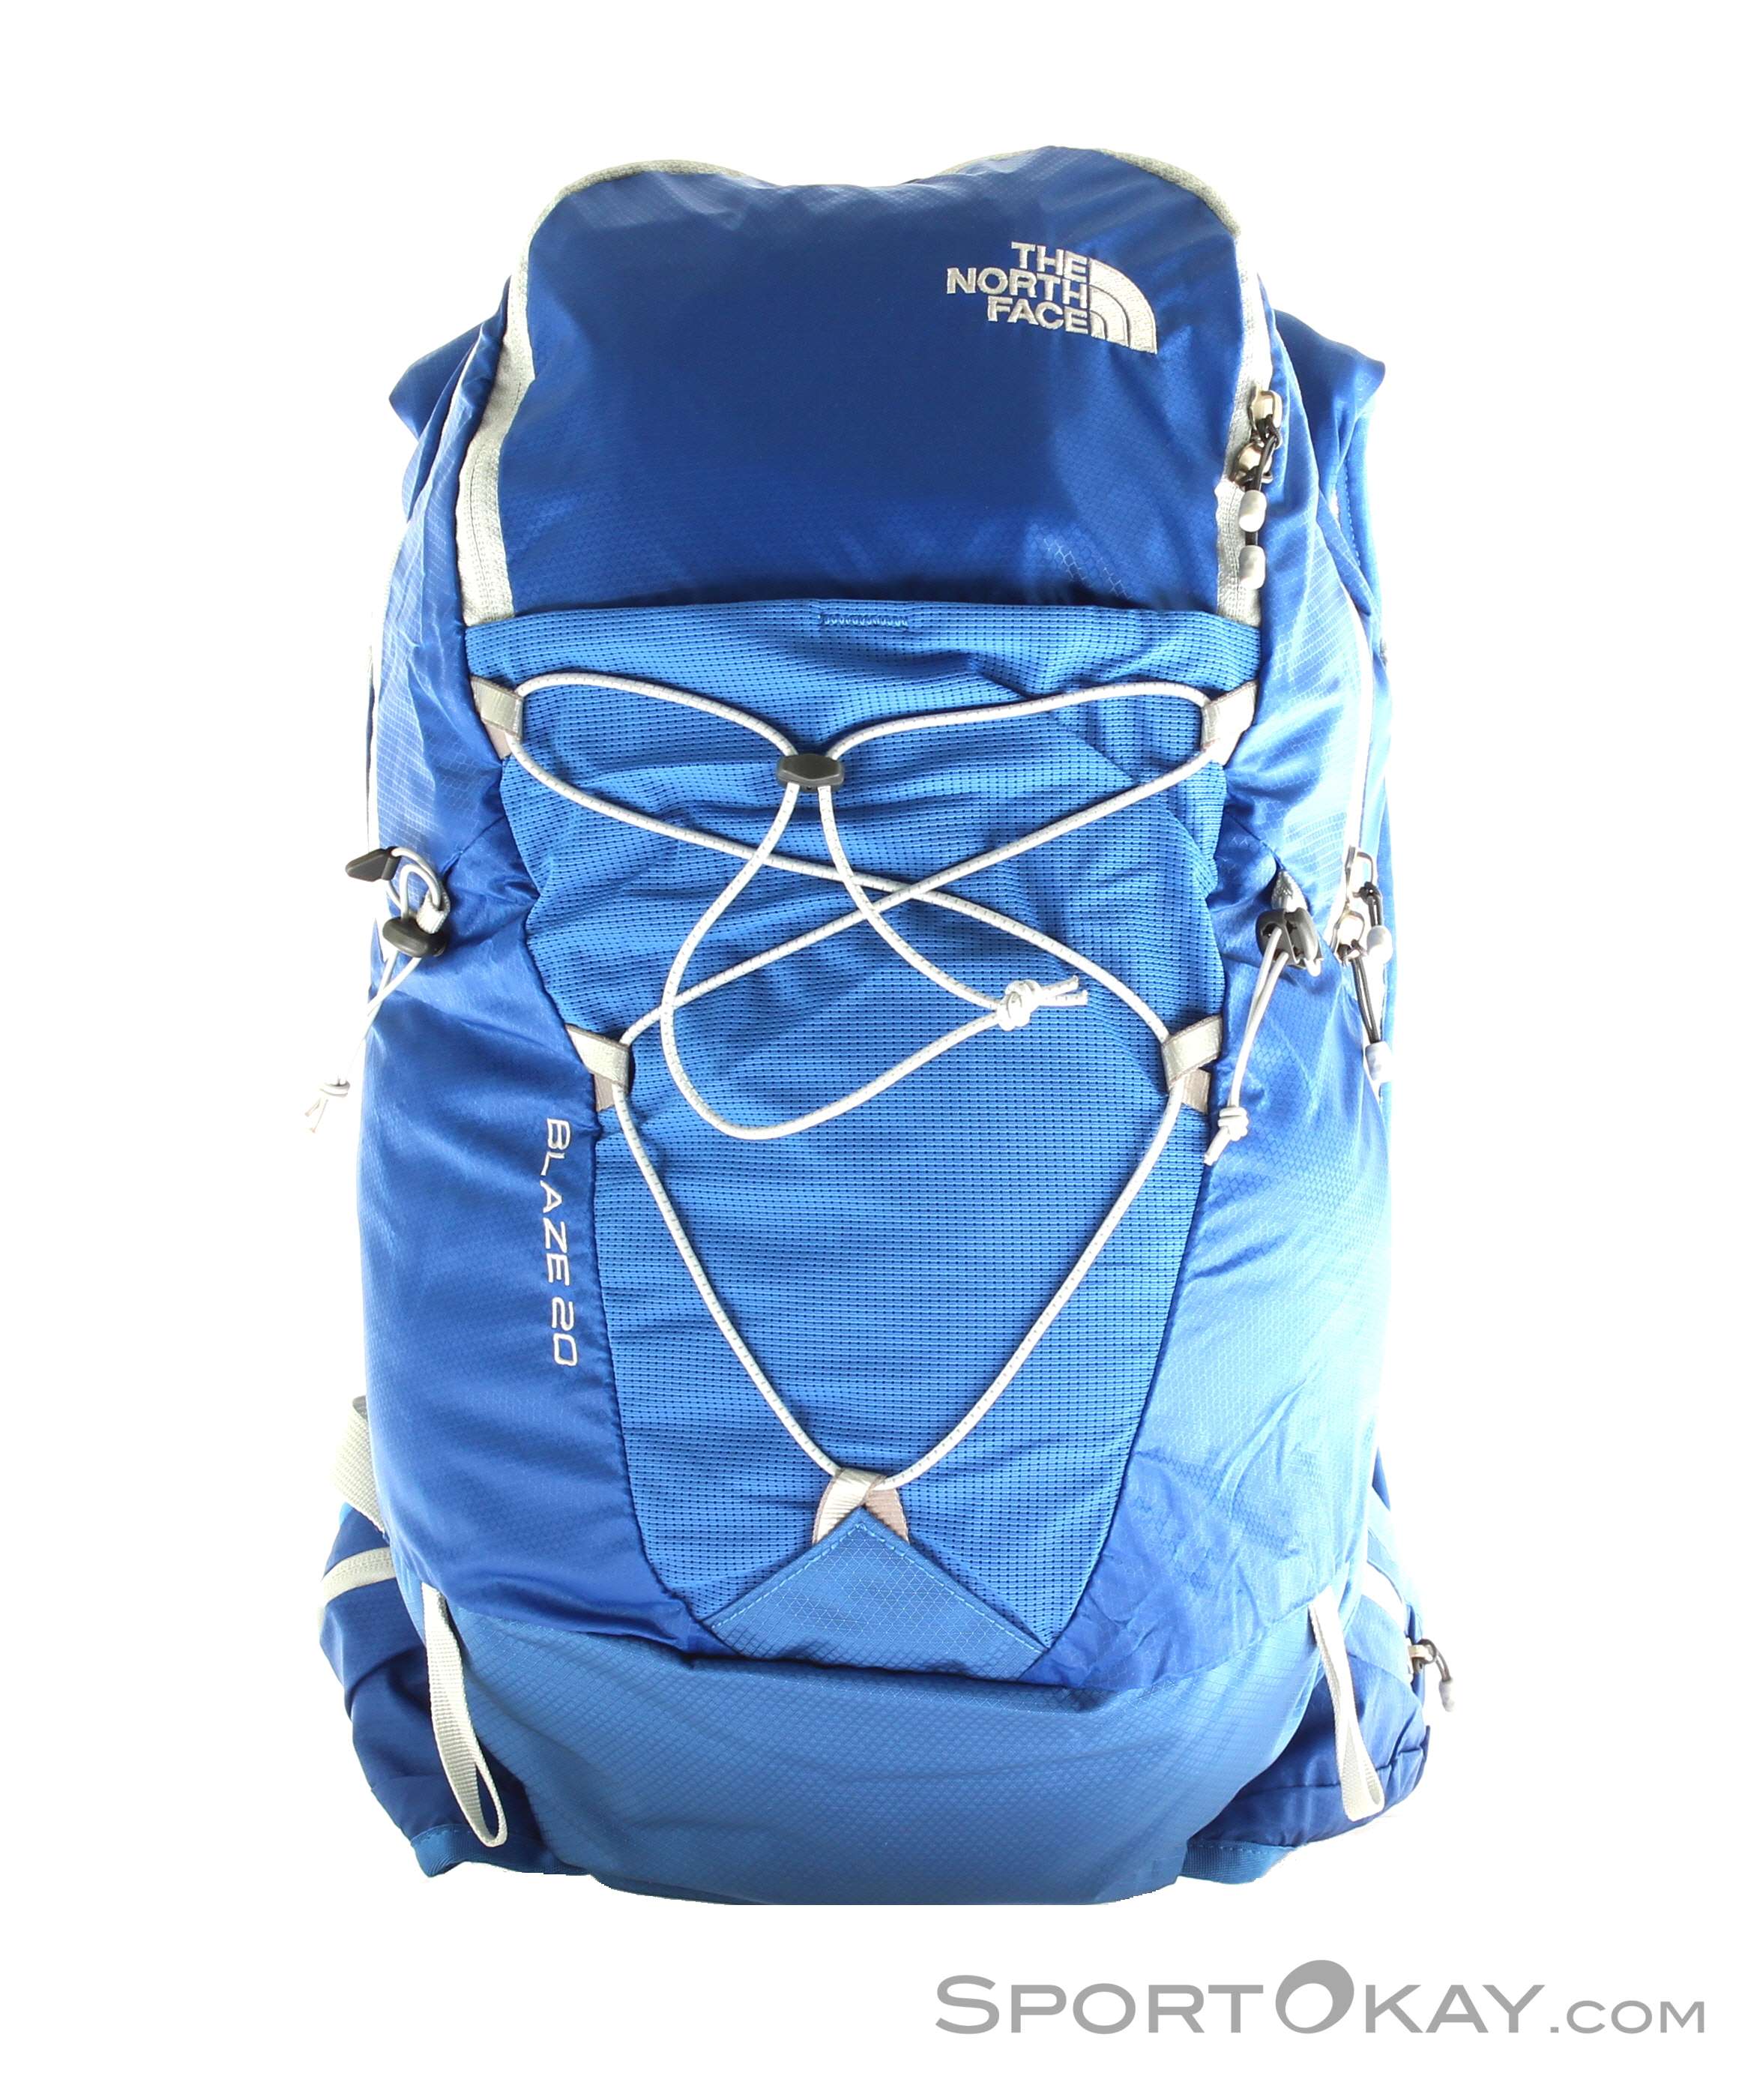 The North Face Blaze 20l Backpack 